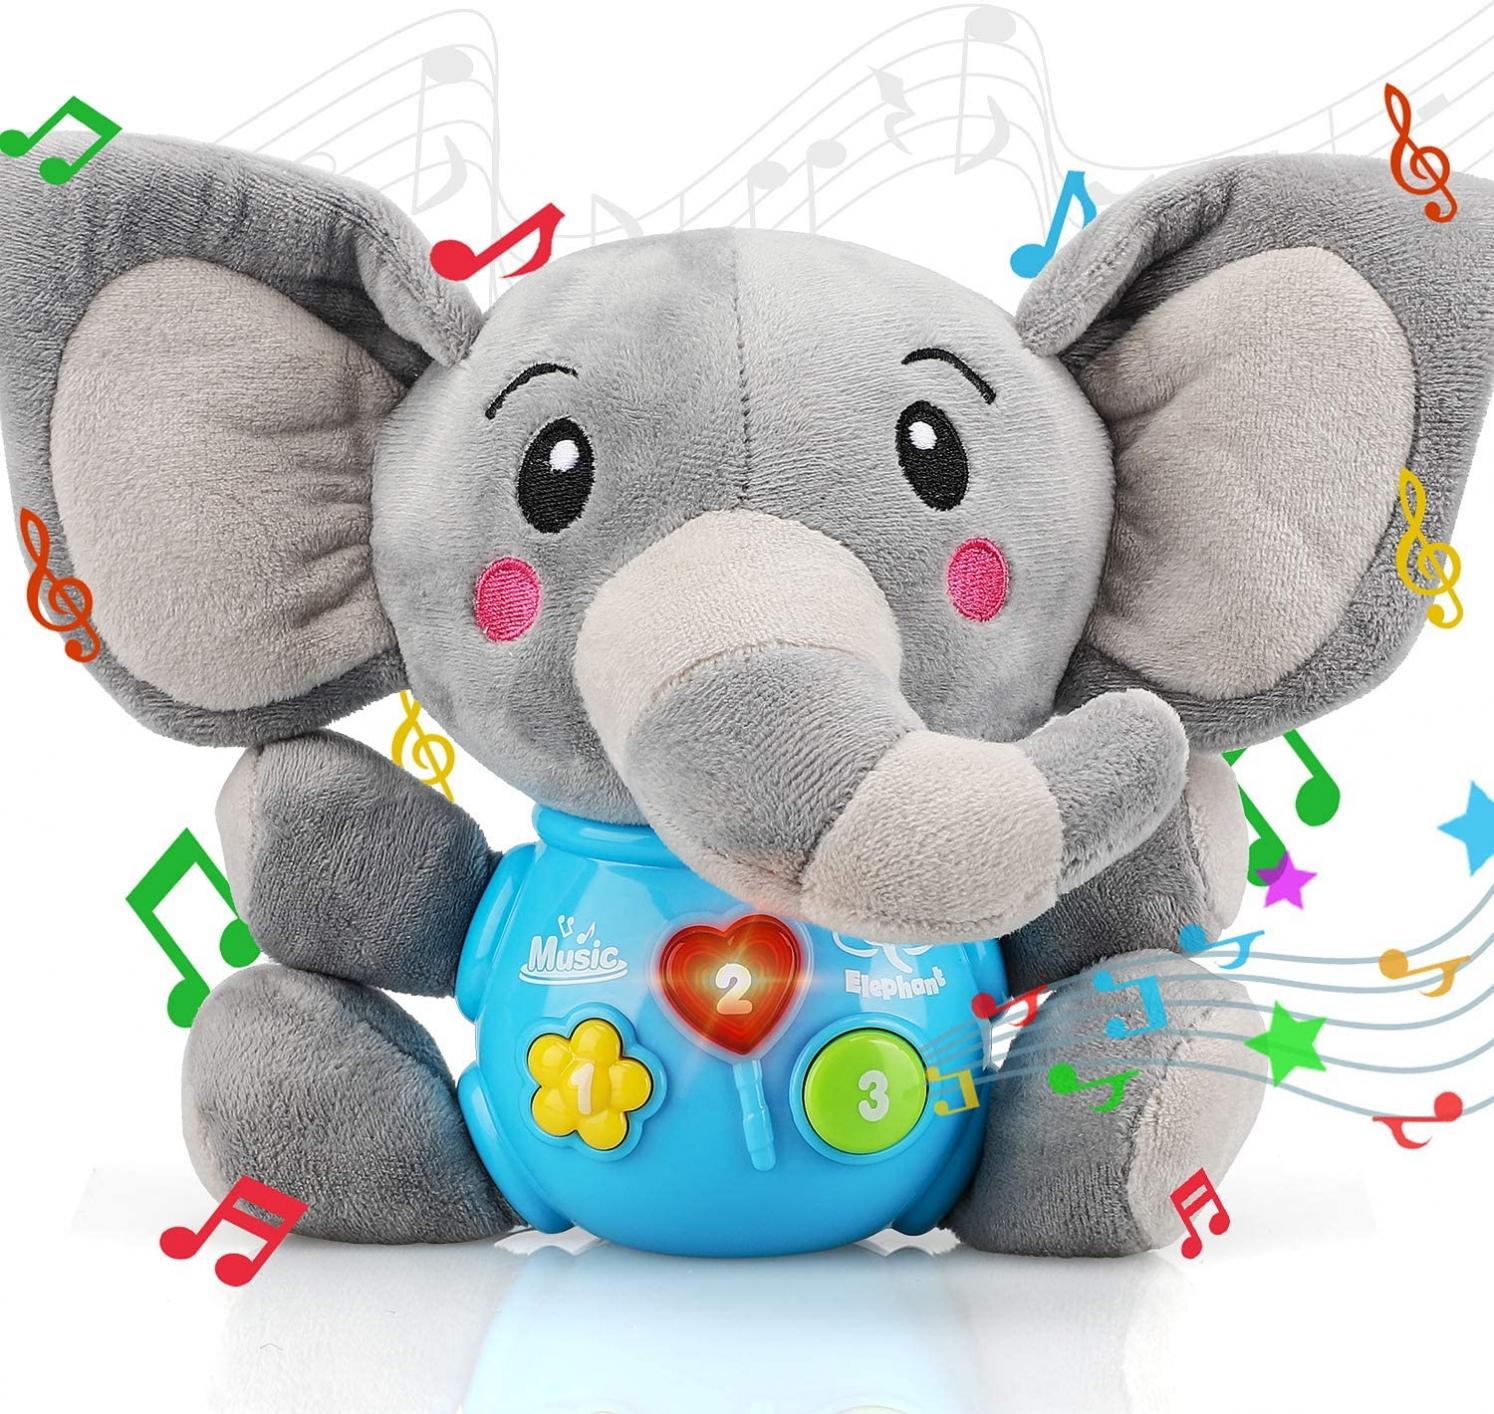 STEAM Life Baby Toys 0 3 6 12 Months - Plush Elephant Infant Toys - Newborn Baby Musical Toys for Baby 6 to 12 Months - Light Up Baby Toys for Boys Girls Toddlers - Baby Gifts for 0 3 6 9 12 Month